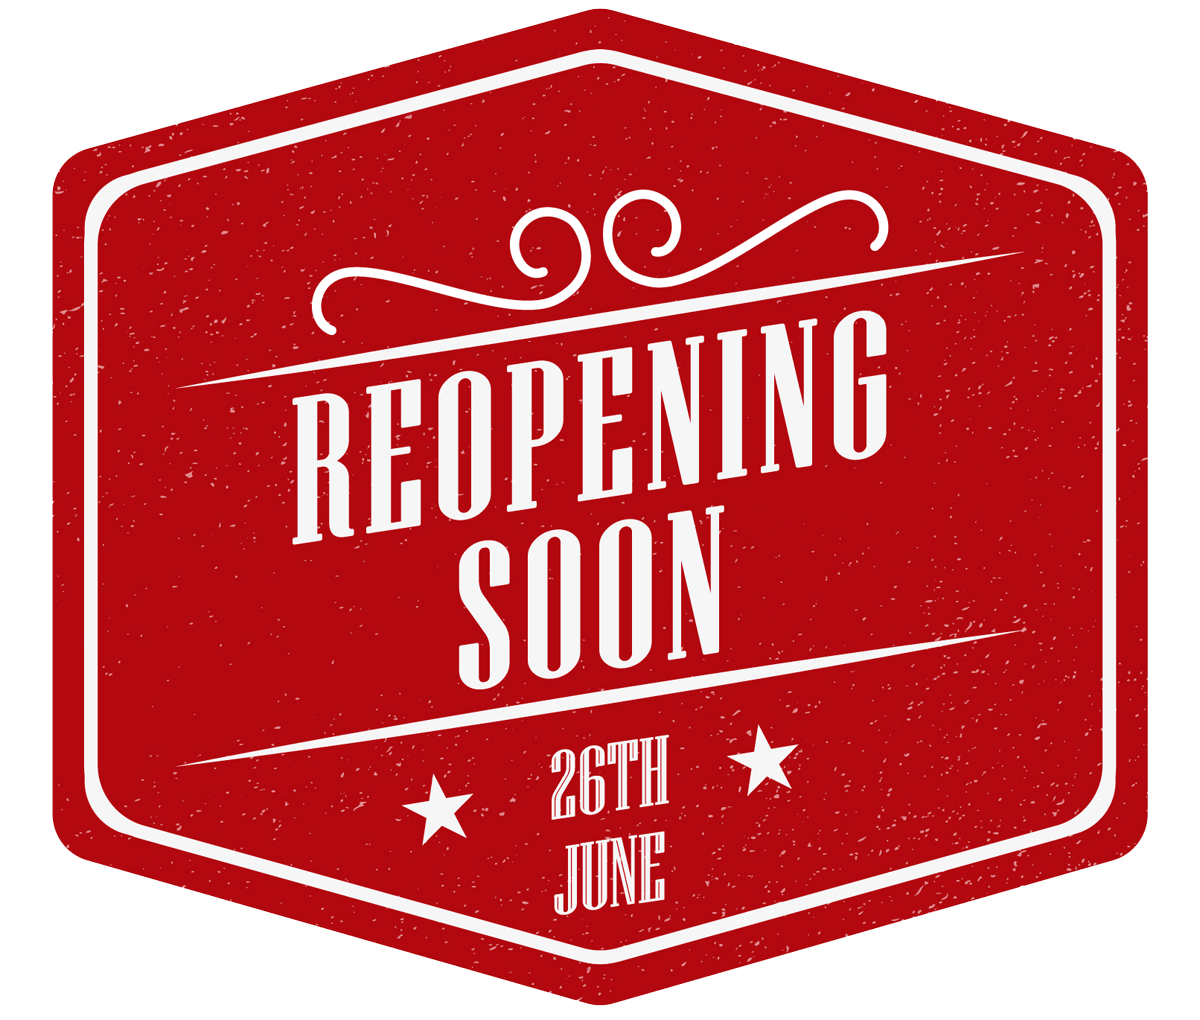 Reopening Soon